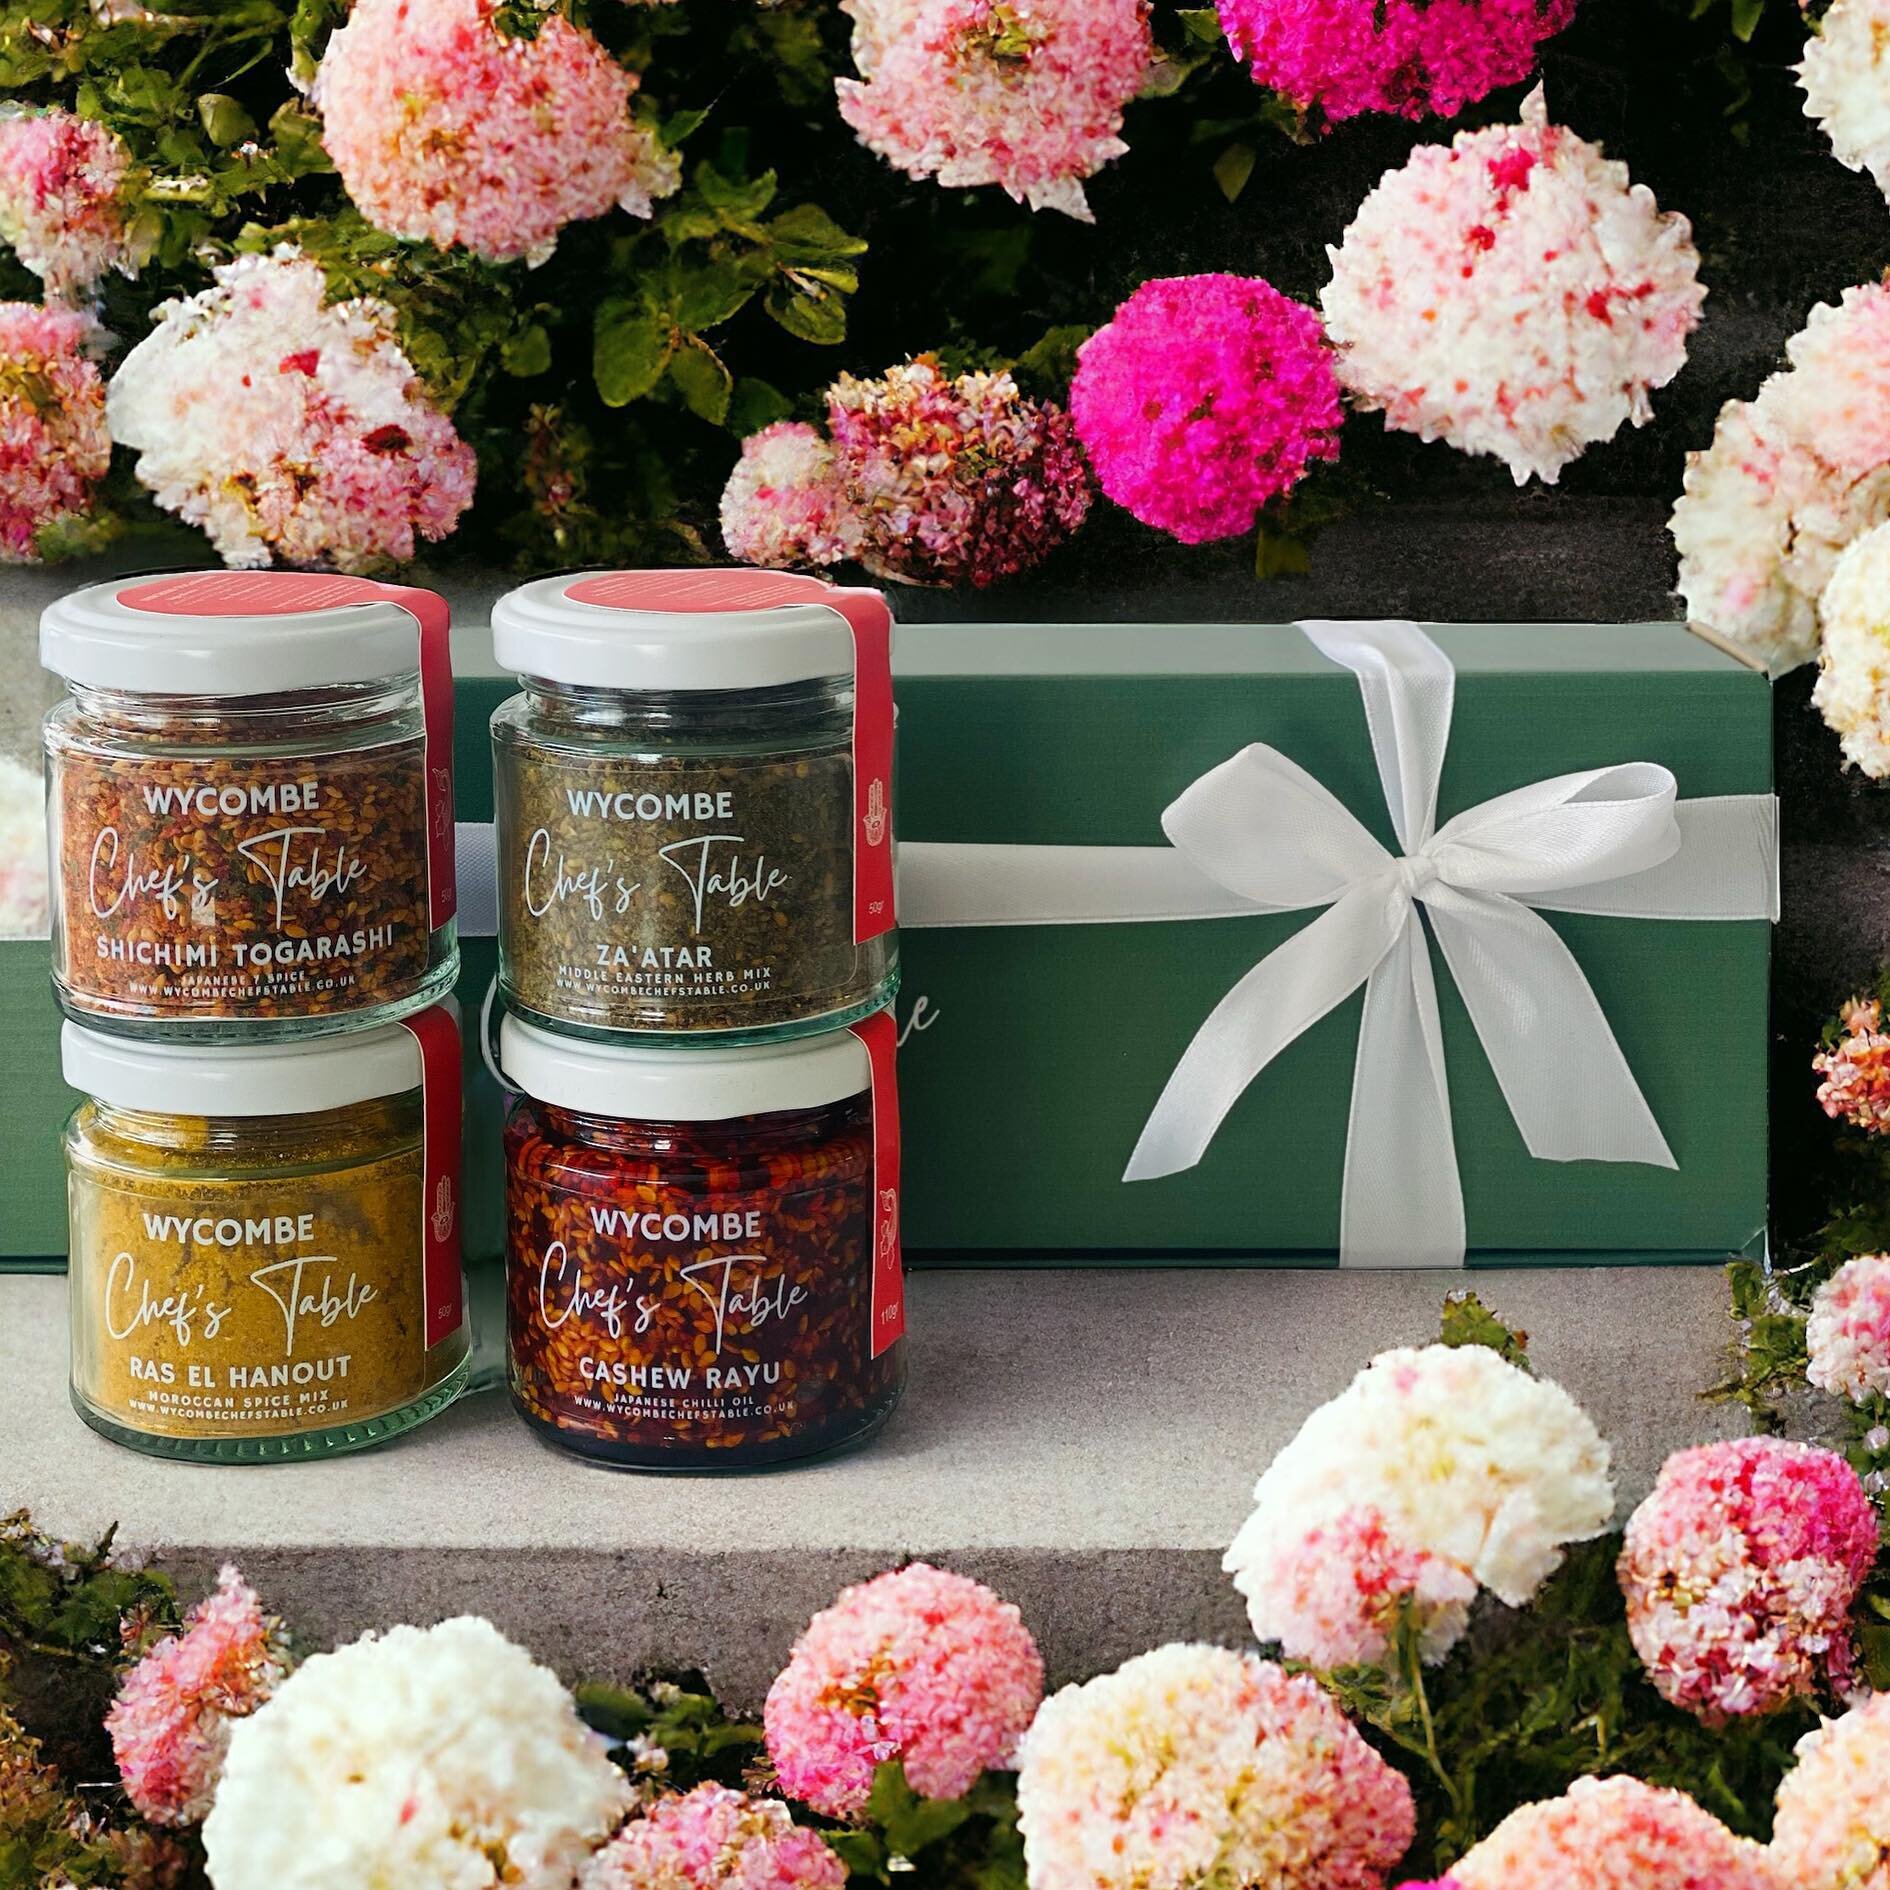 Give a gift of flavours this Mother&rsquo;s Day.

Choose from Japanese and Middle Eastern spices for Mother&rsquo;s Day or make your own box. 

You can offer a culinary journey that will delight her taste buds and inspire her to create flavorful dish